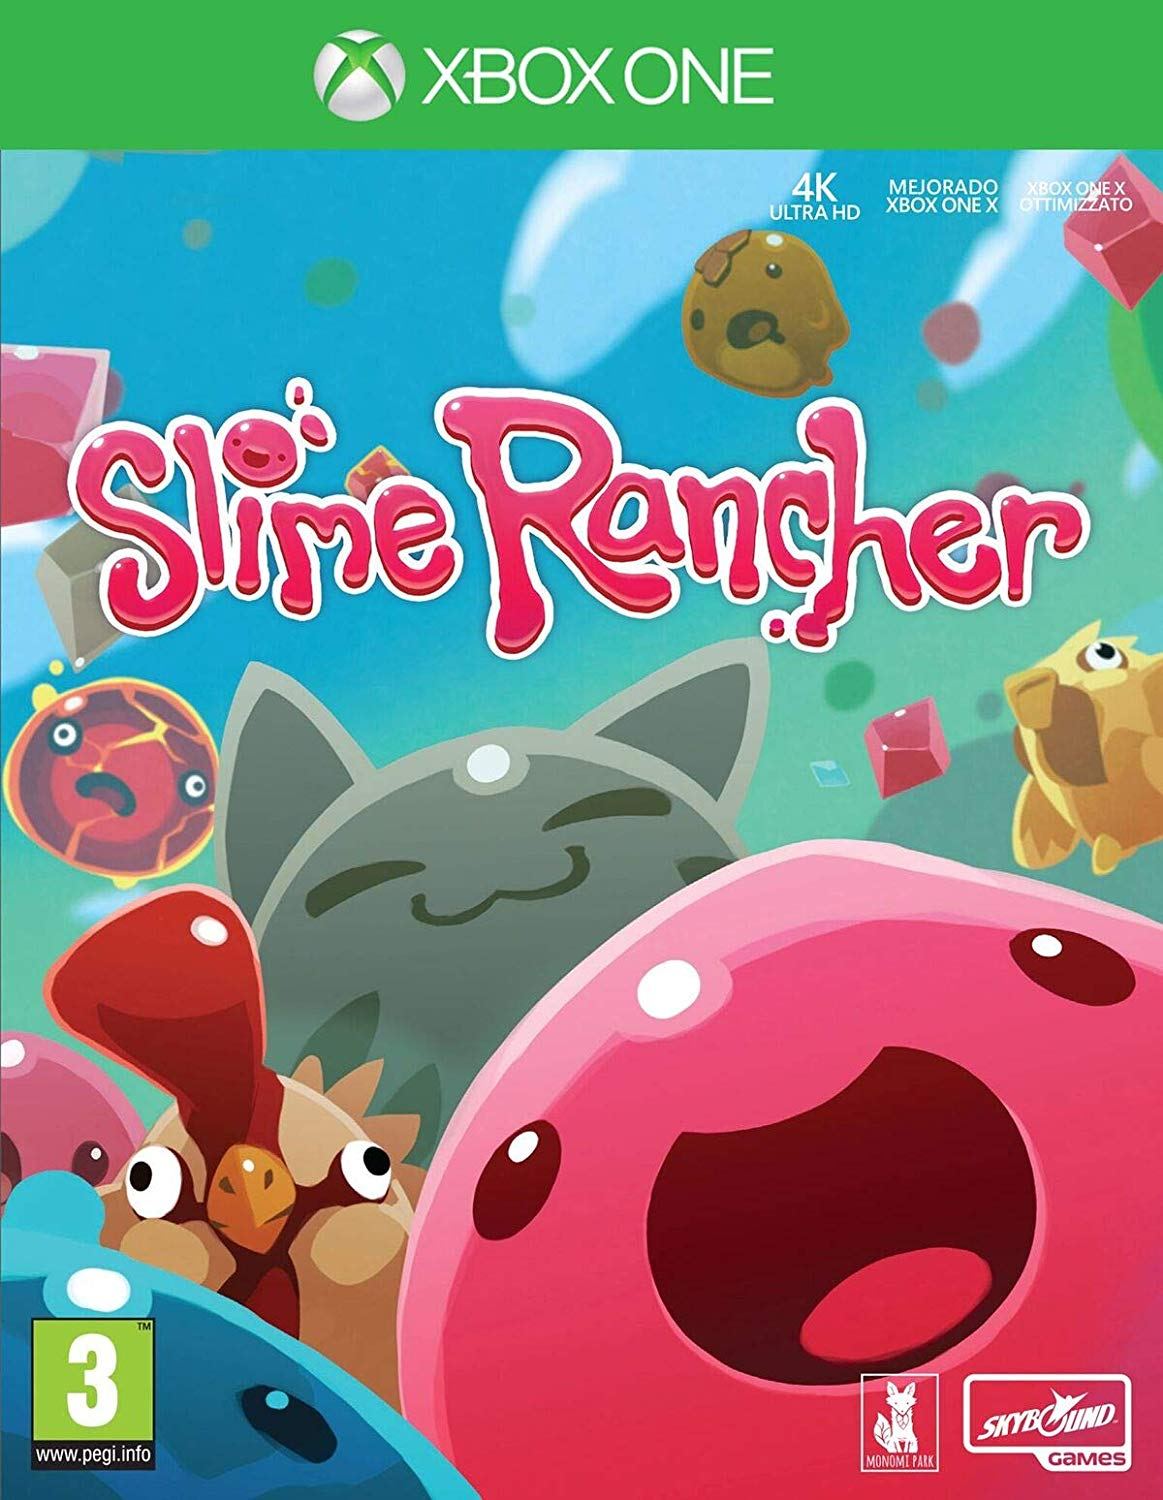 slime rancher characters